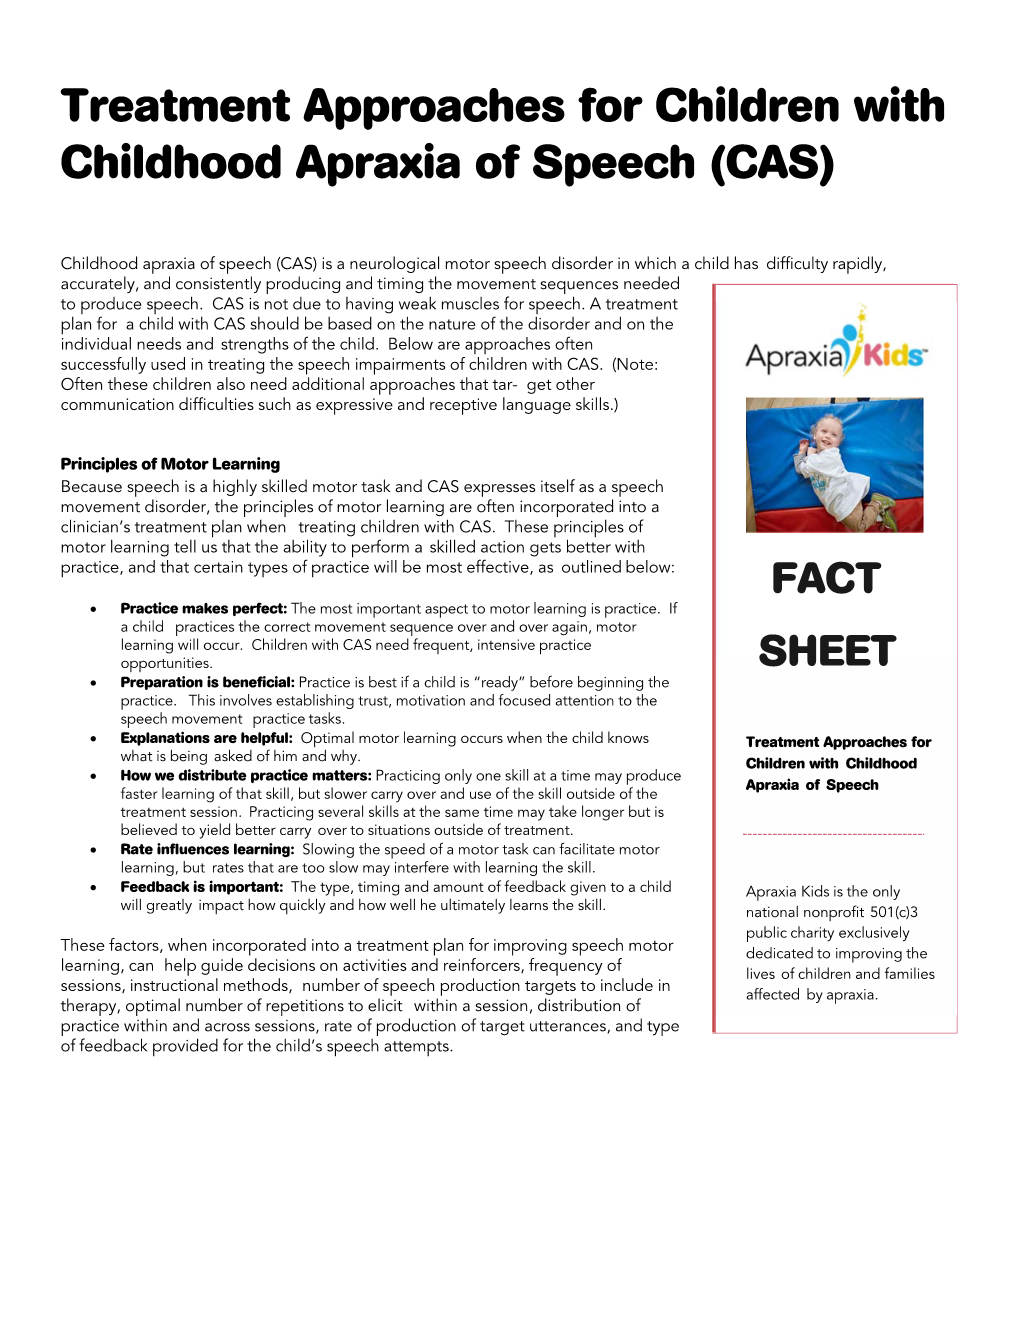 Treatment Approaches for Children with Childhood Apraxia of Speech (CAS)